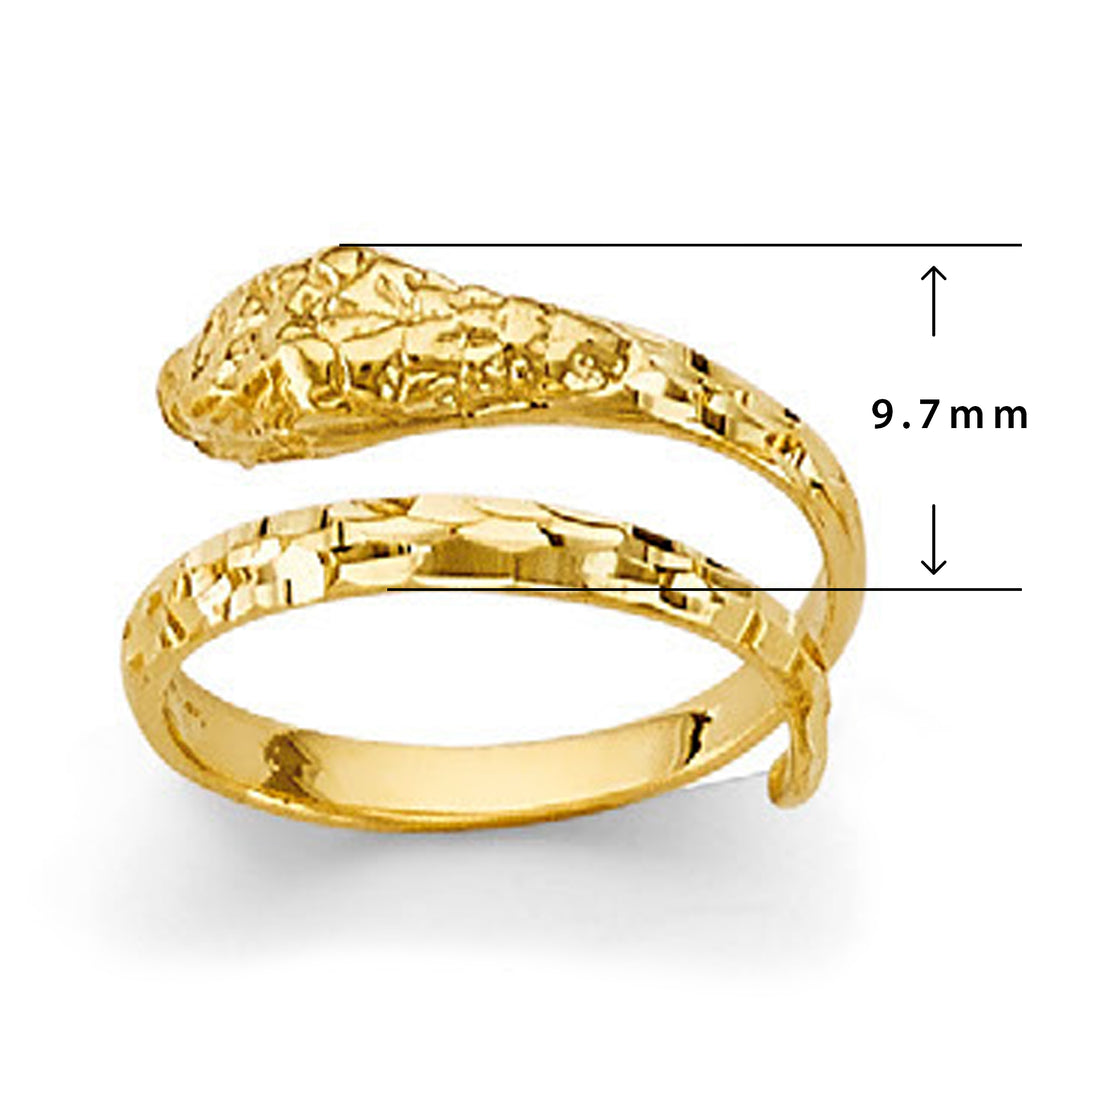 Wrapped Snake Ring in Solid Gold with Measurement